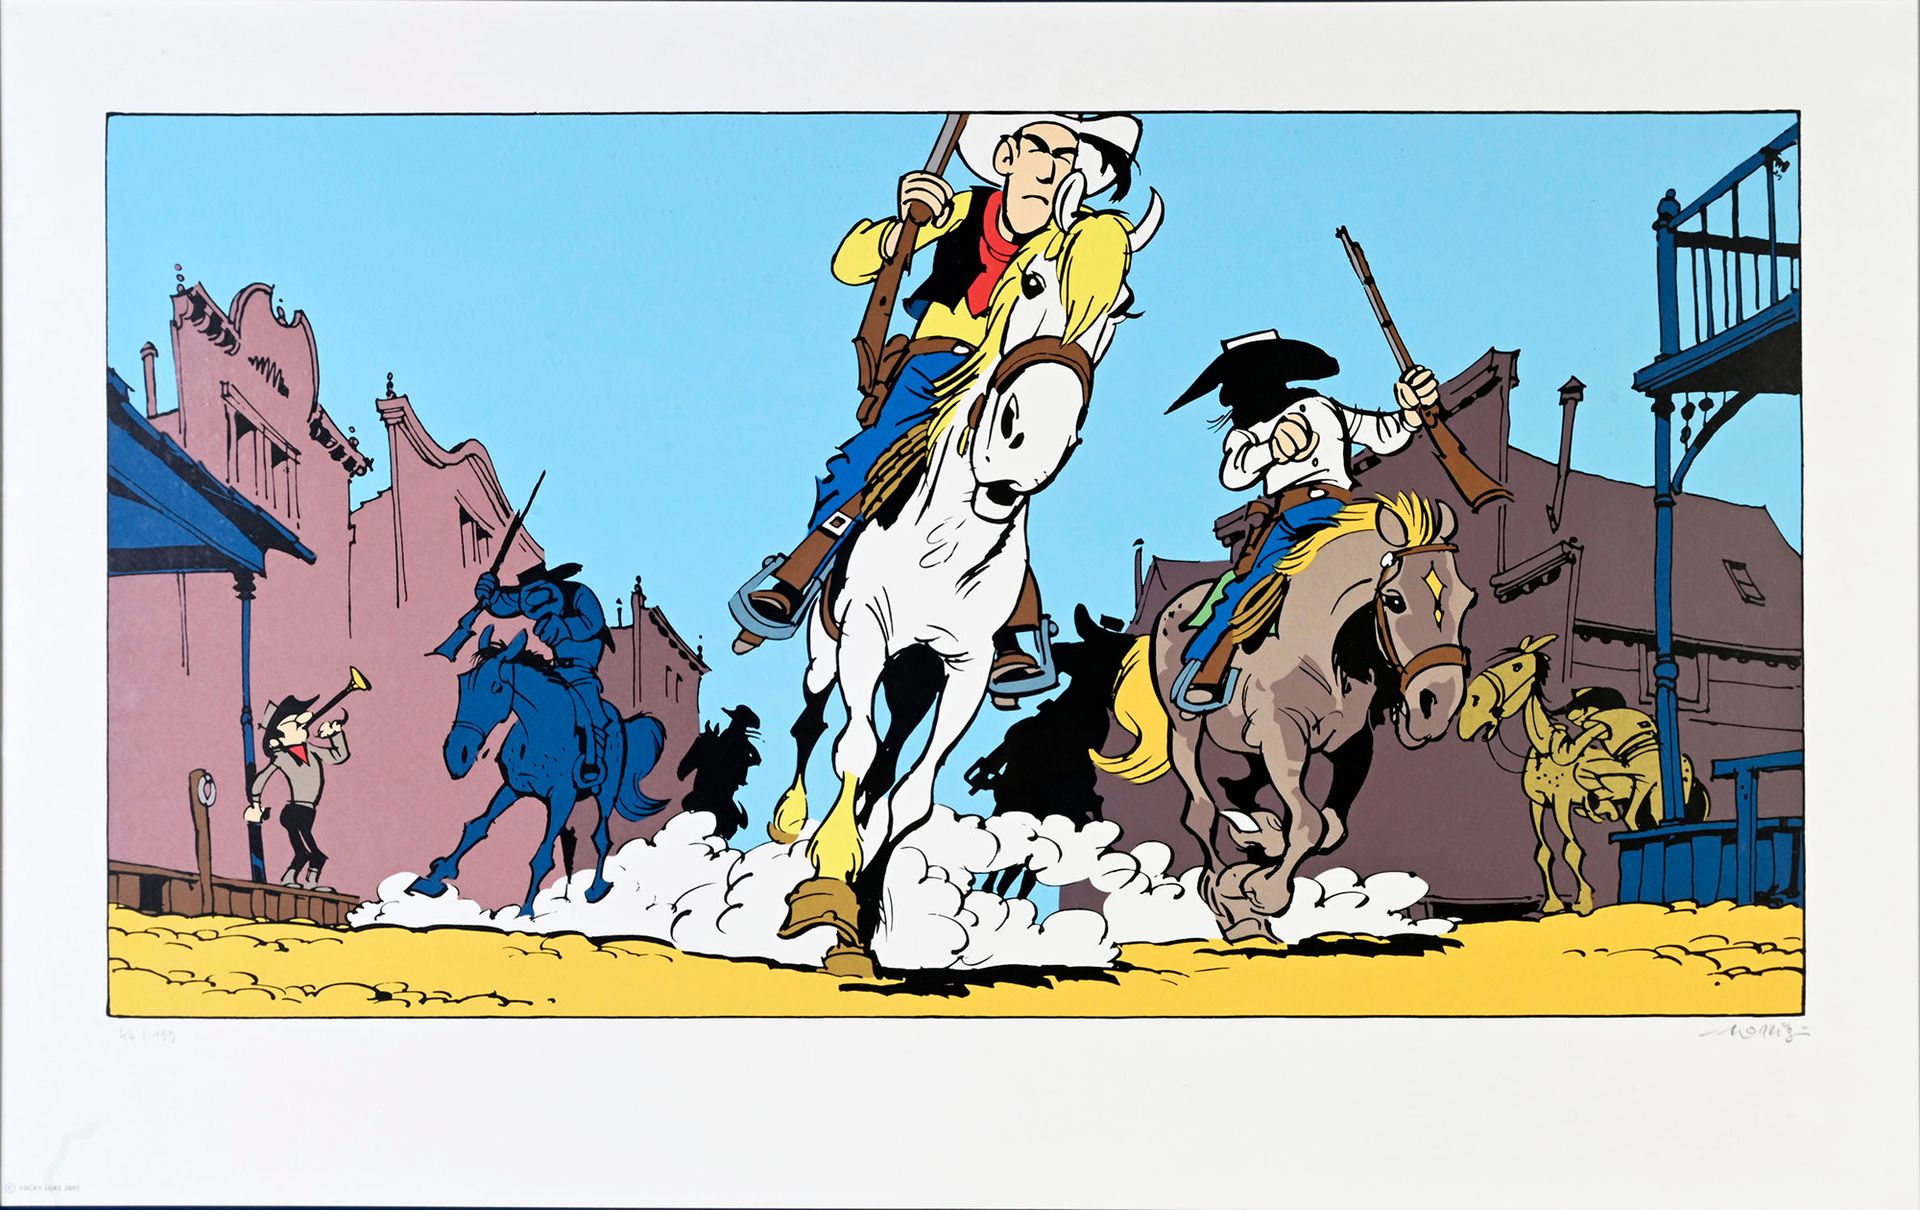 MORRIS LUCKY LUKE.
SERIGRAPHY "BLUE FEET ALERT
Edited in 2000, numbered 47/199 a&hellip;